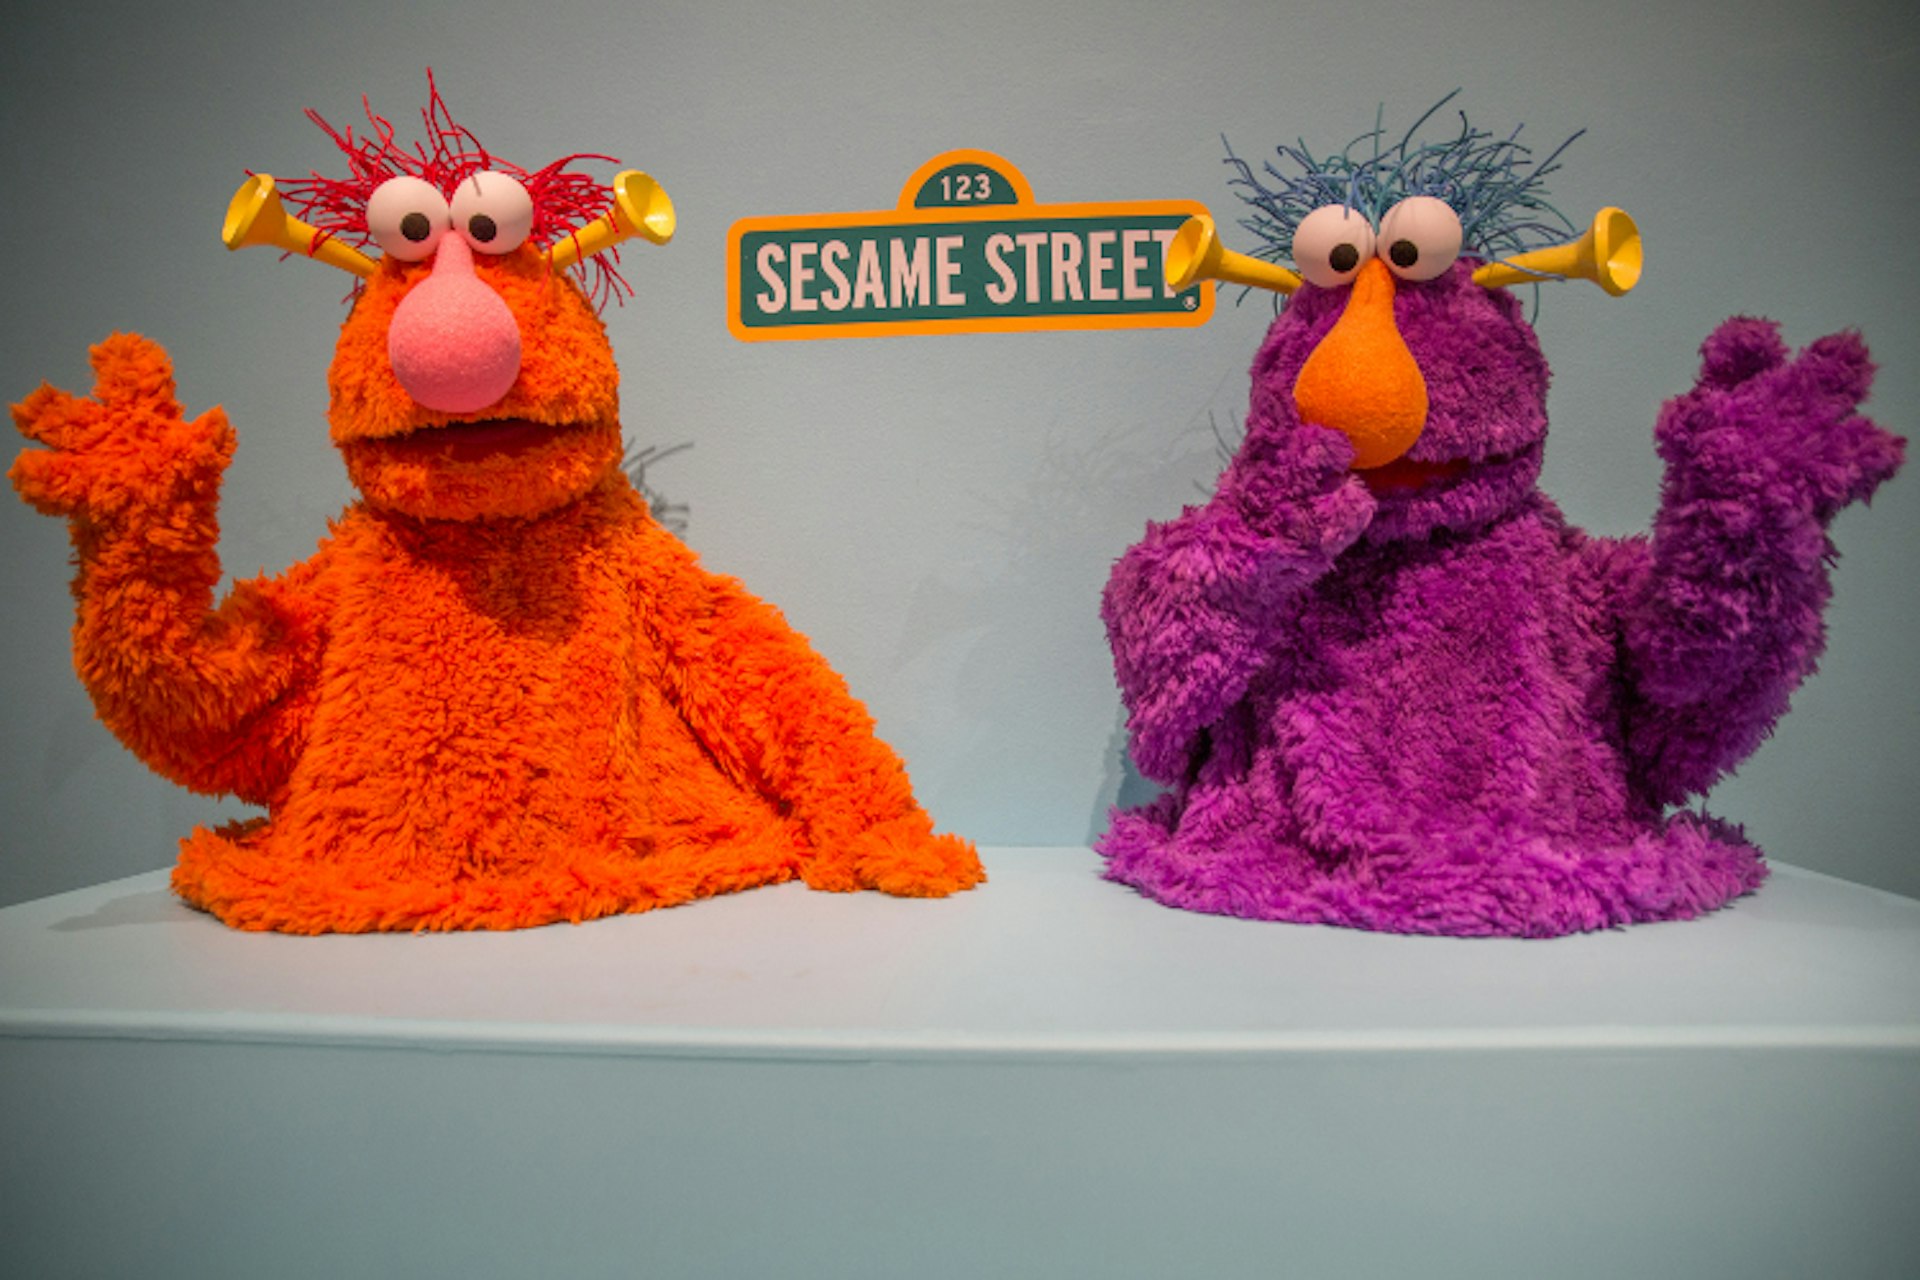 Celebrating 45 years of Sesame Street. Image by Jonathan Blanc / The New York Public Library